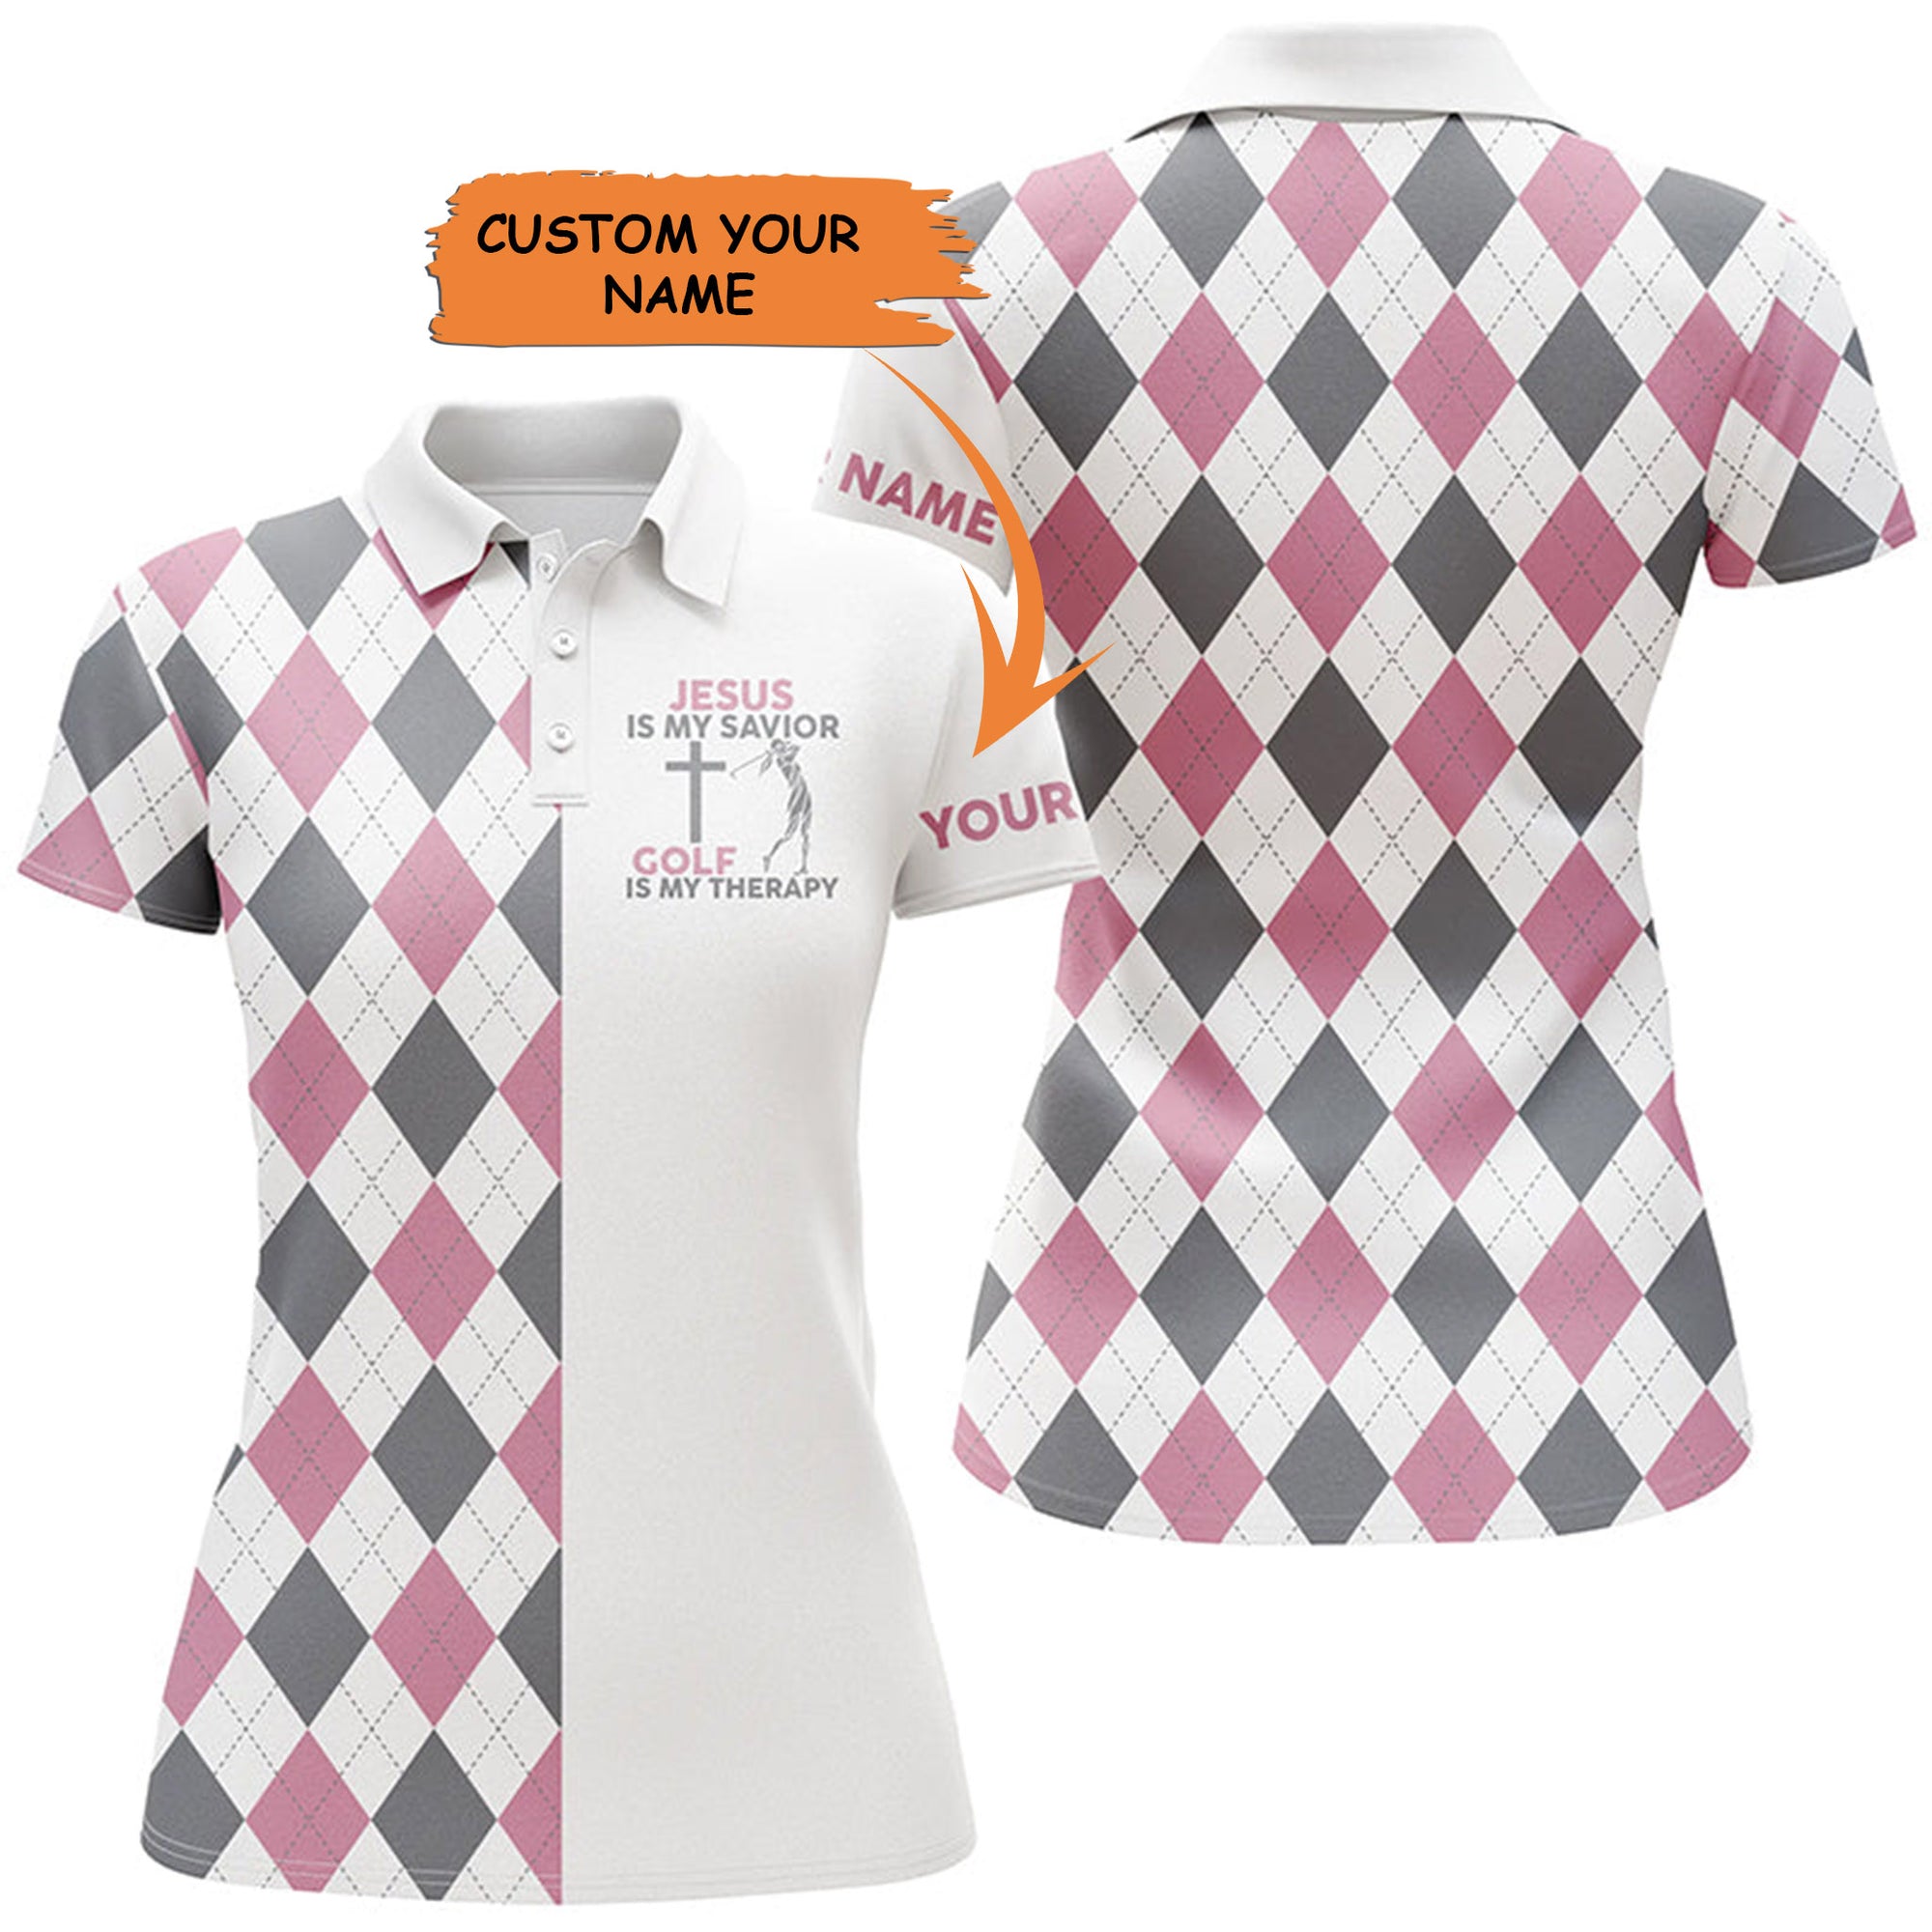 Womens Golf Polo Shirt Jesus Is My Savior Golf Is My Therapy Custom Pink Argyle Plaid Ladies Golf Tops, Best Gift For Women